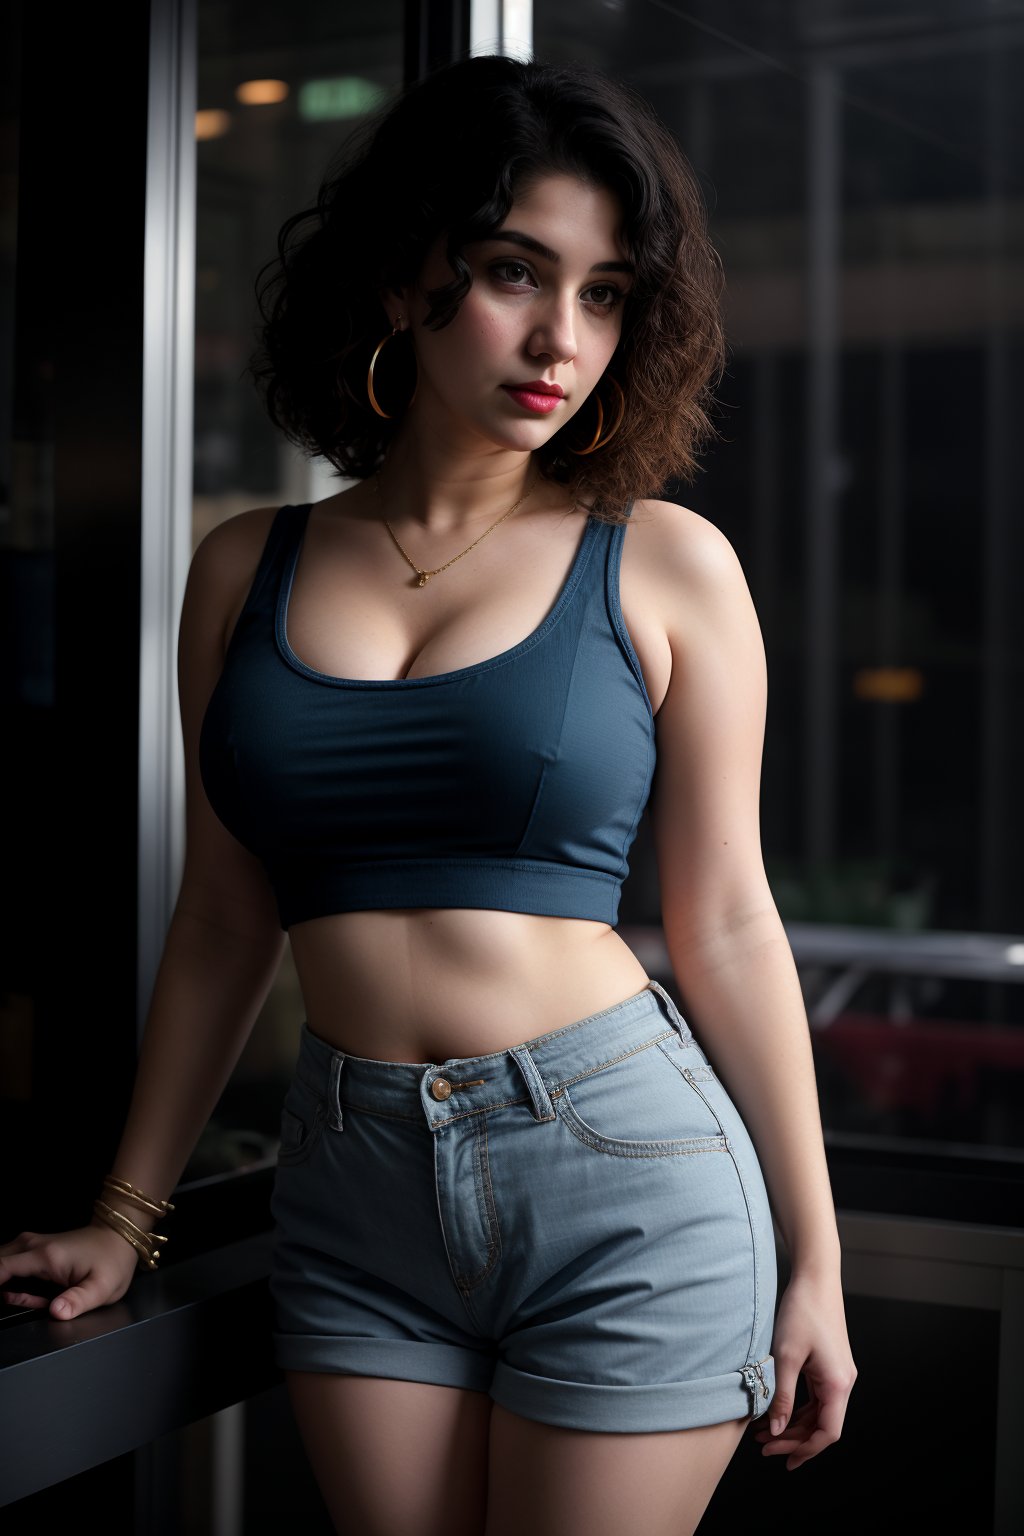 Bra:2, t shirt, Tanktop, plump, Cyberpunk, Neon glow, curvy women:2, milf ,  bubbly, masterpiece, high resolution,  long gown, best quality, 4k, plump face, 38 years old , huge,  women, shorts,  hot pants, thick_hip, solo, beauty photo, amateur photo, skin texture:2, 1girl, eye level, and hoop earrings, red_teal_orange-colored busty ironed straight, stand, room,lighting,photorealistic ,CyberpunkWorld, twin_tailscprebecca,27 year old, dark skin ,Fit girl,Curly girl 